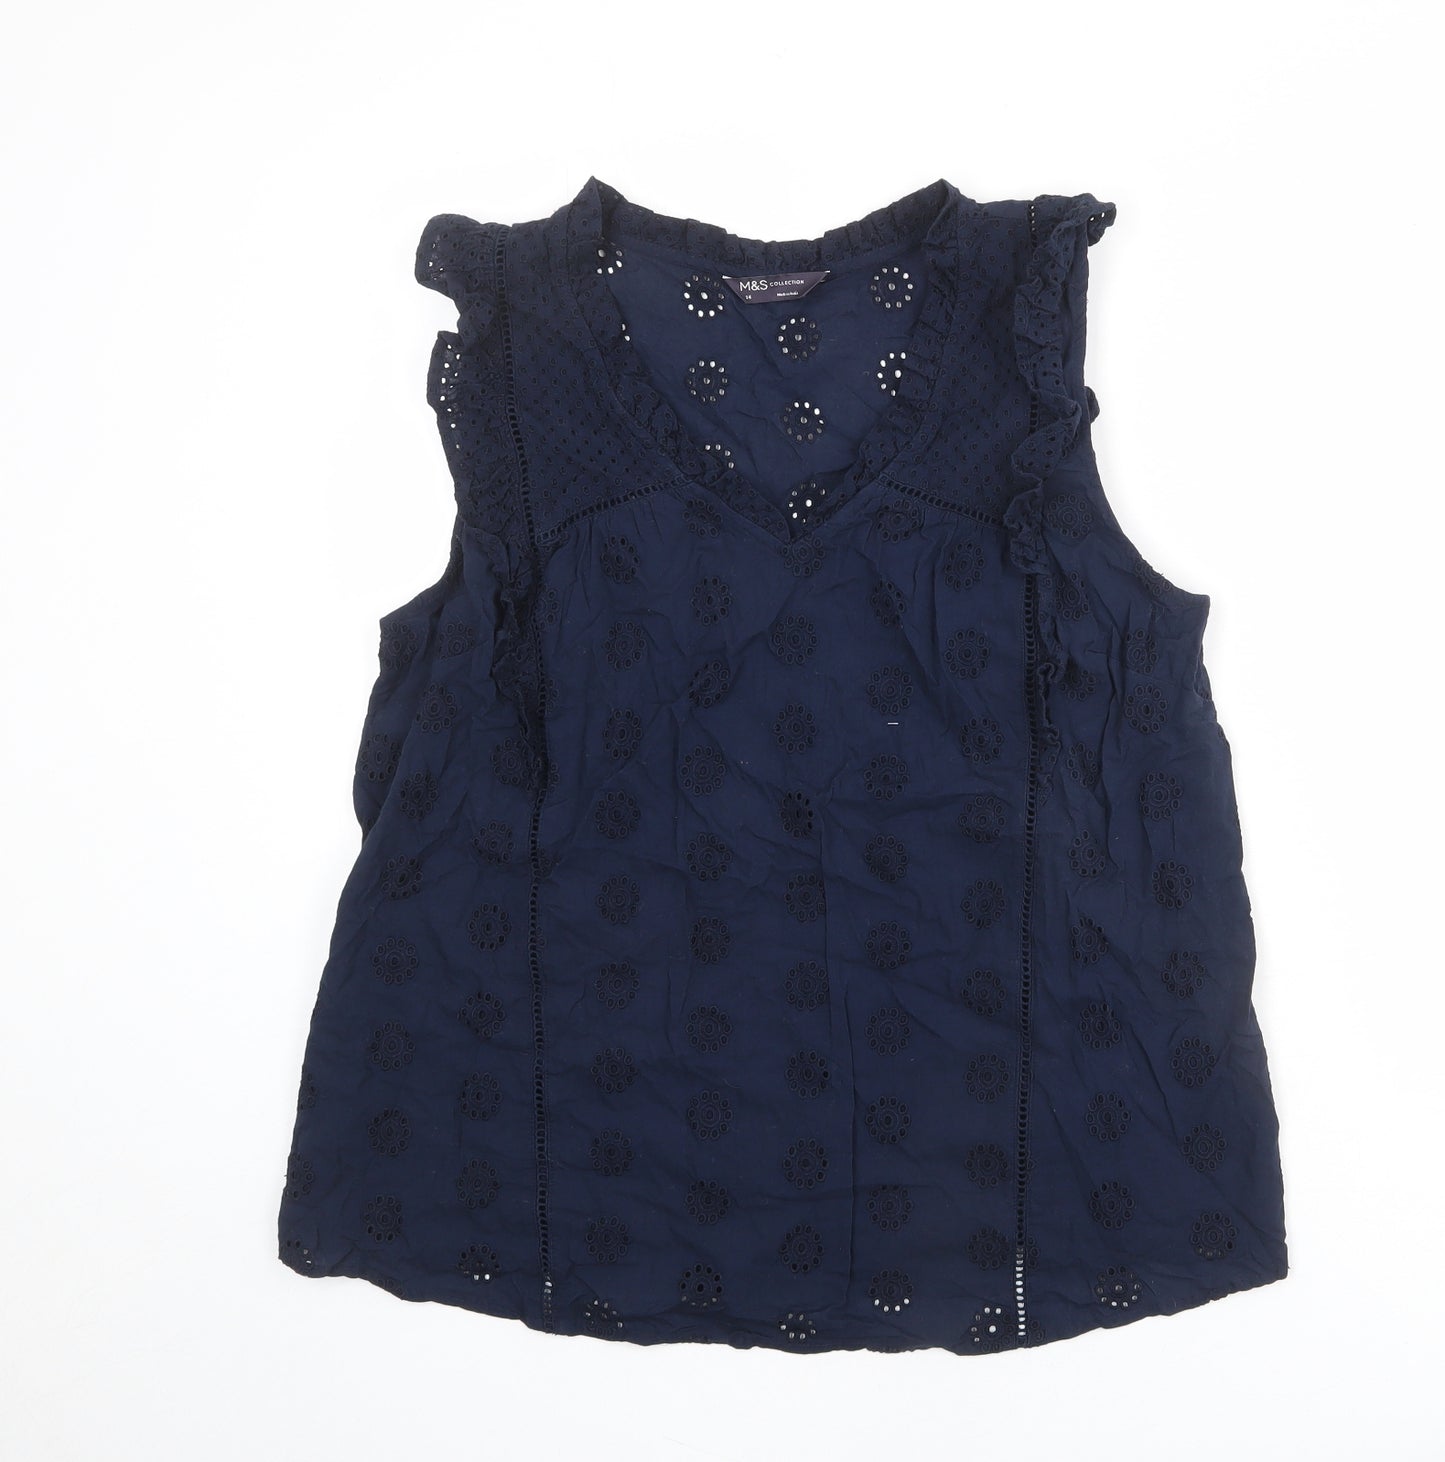 Marks and Spencer Womens Blue Cotton Basic Blouse Size 14 V-Neck - Lace Frill